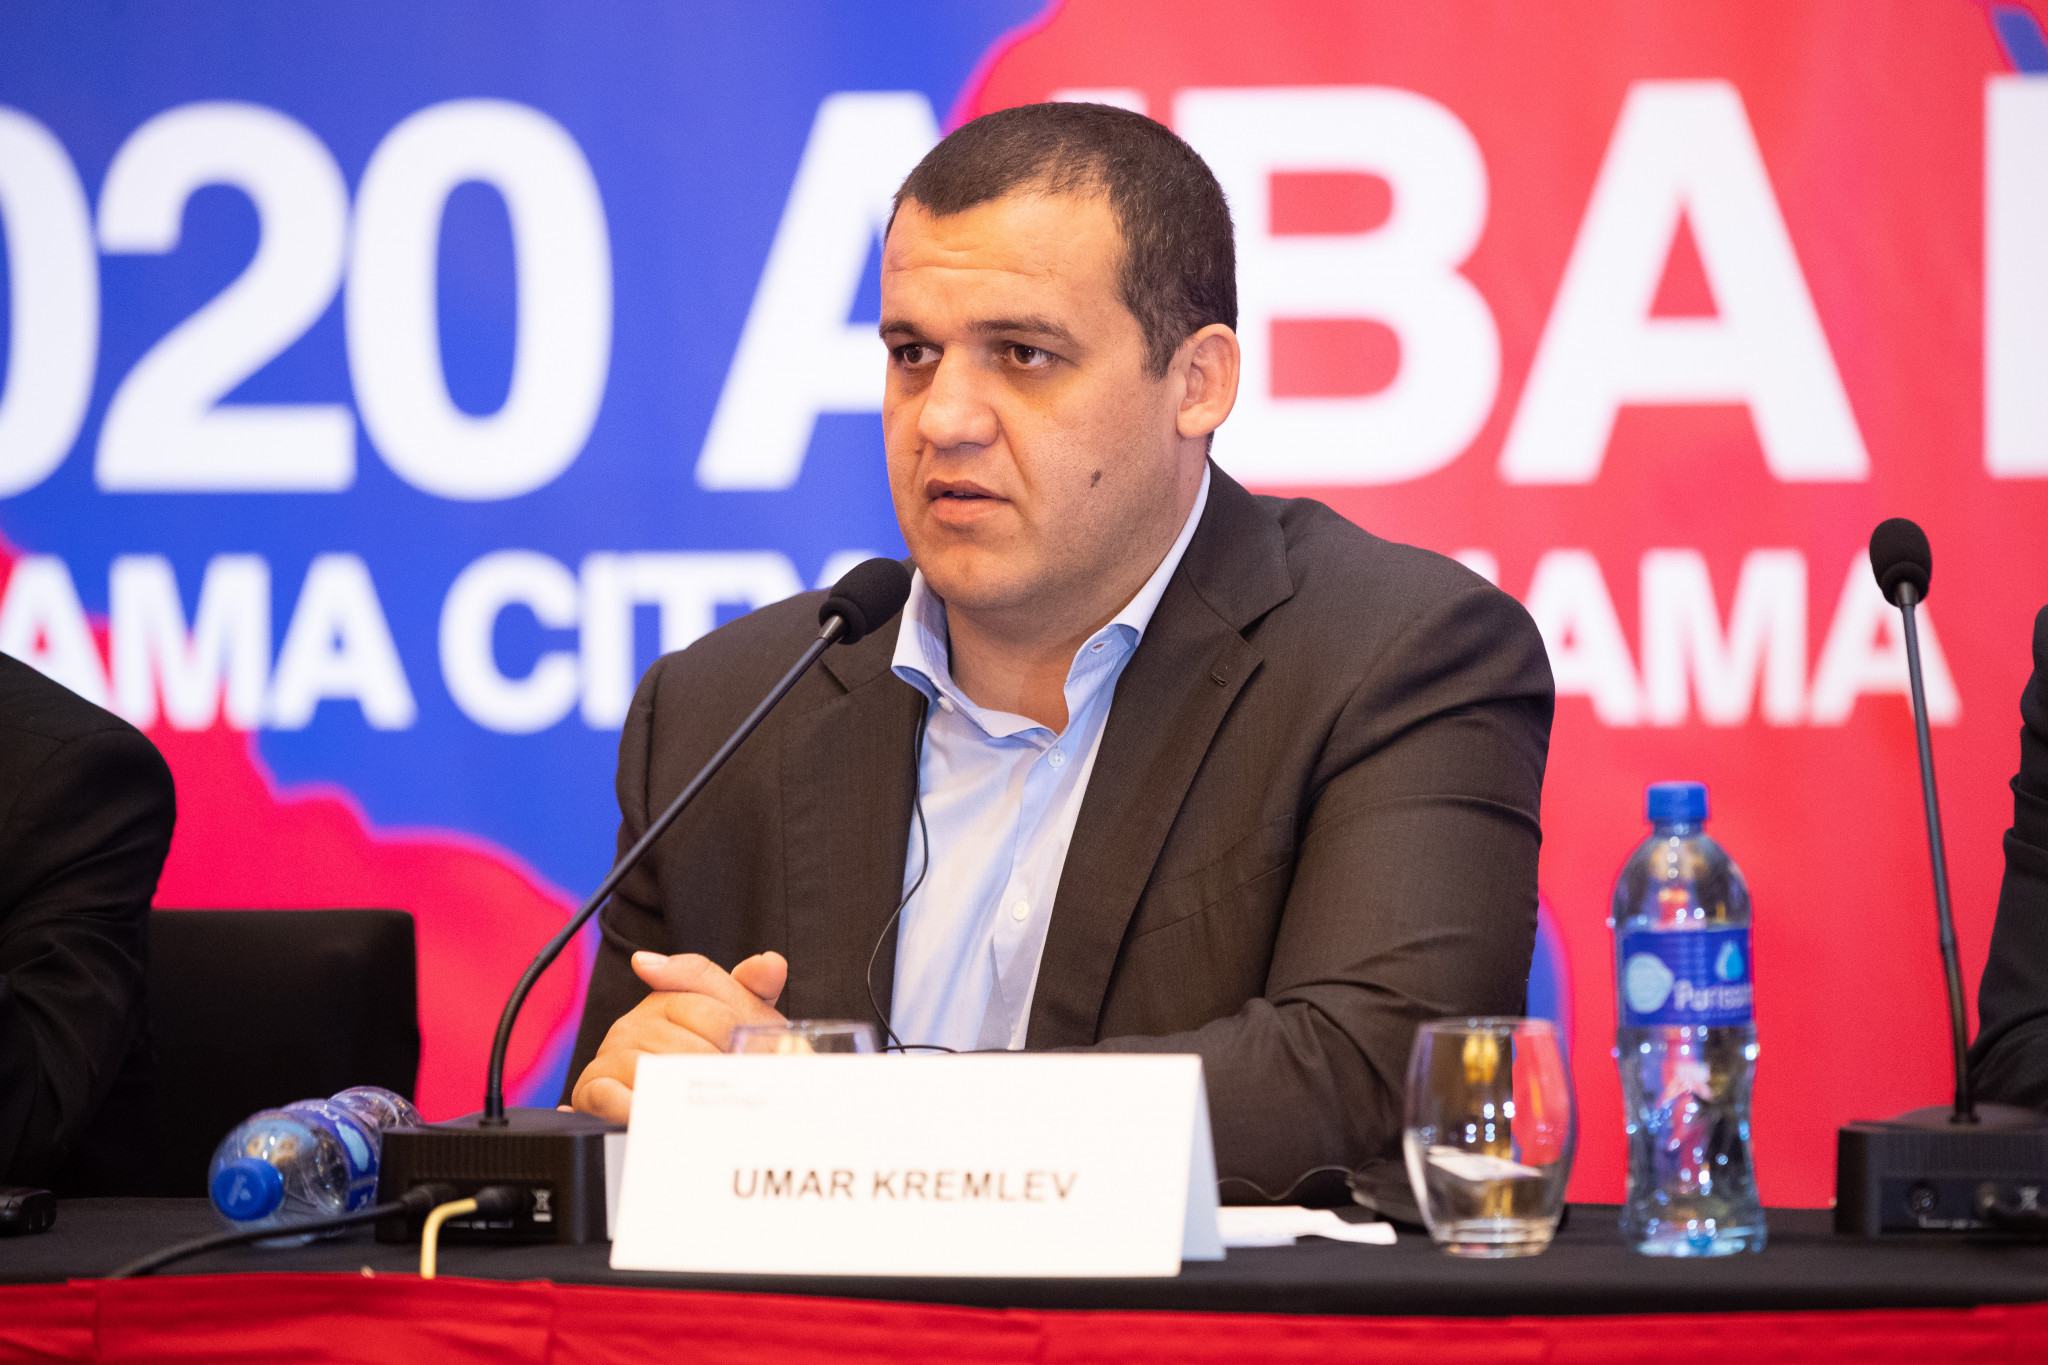 Umar Kremlev was one of five candidates on the ballot for the AIBA Presidency ©AIBA